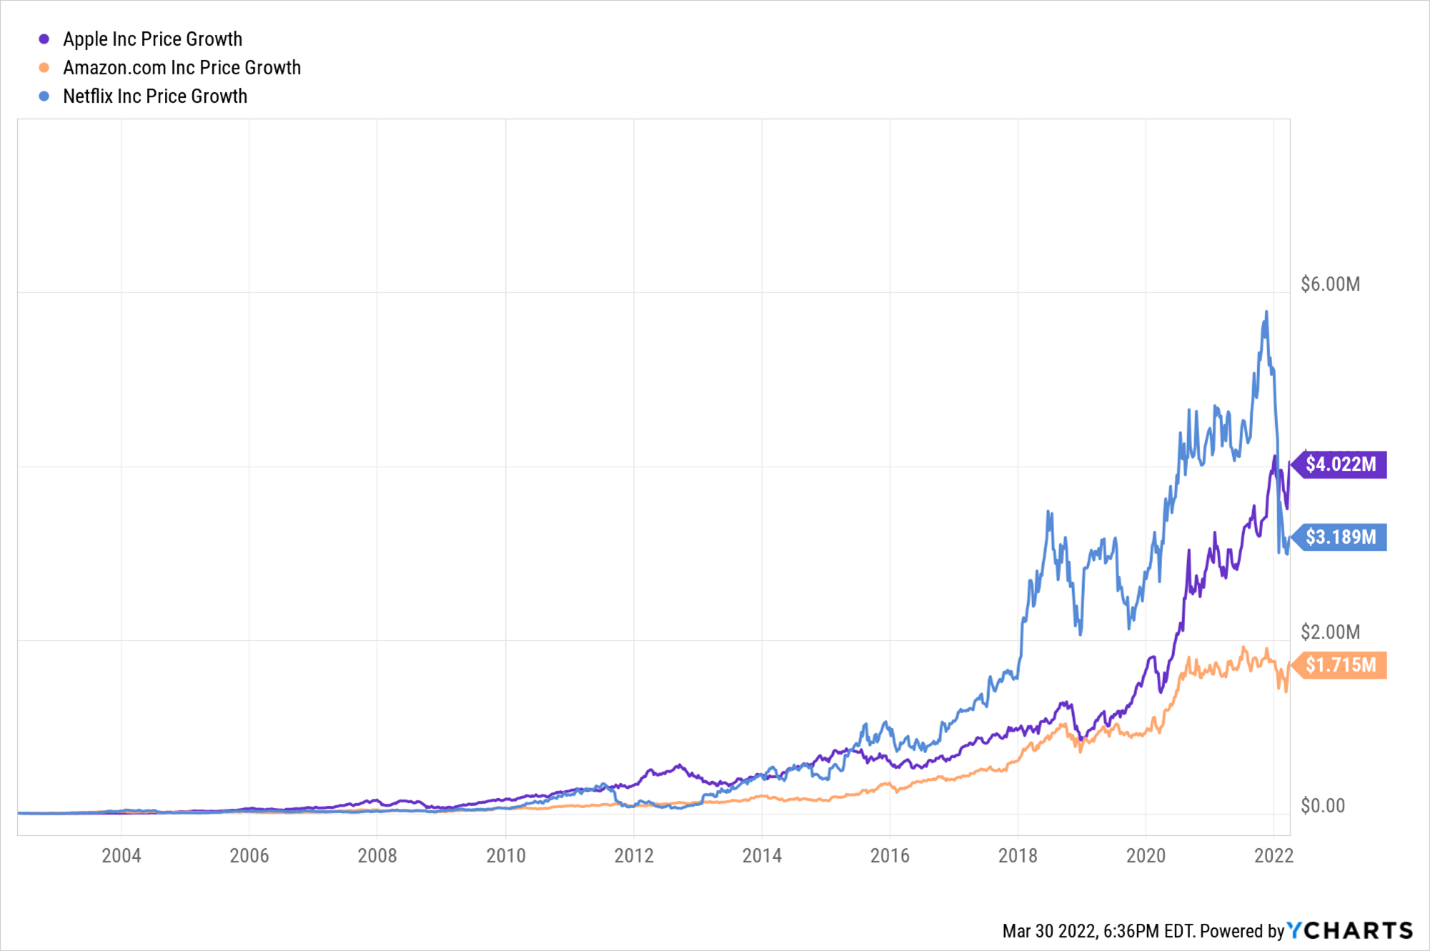 Chart showing Apple, Amazon and Netflix stock price gains